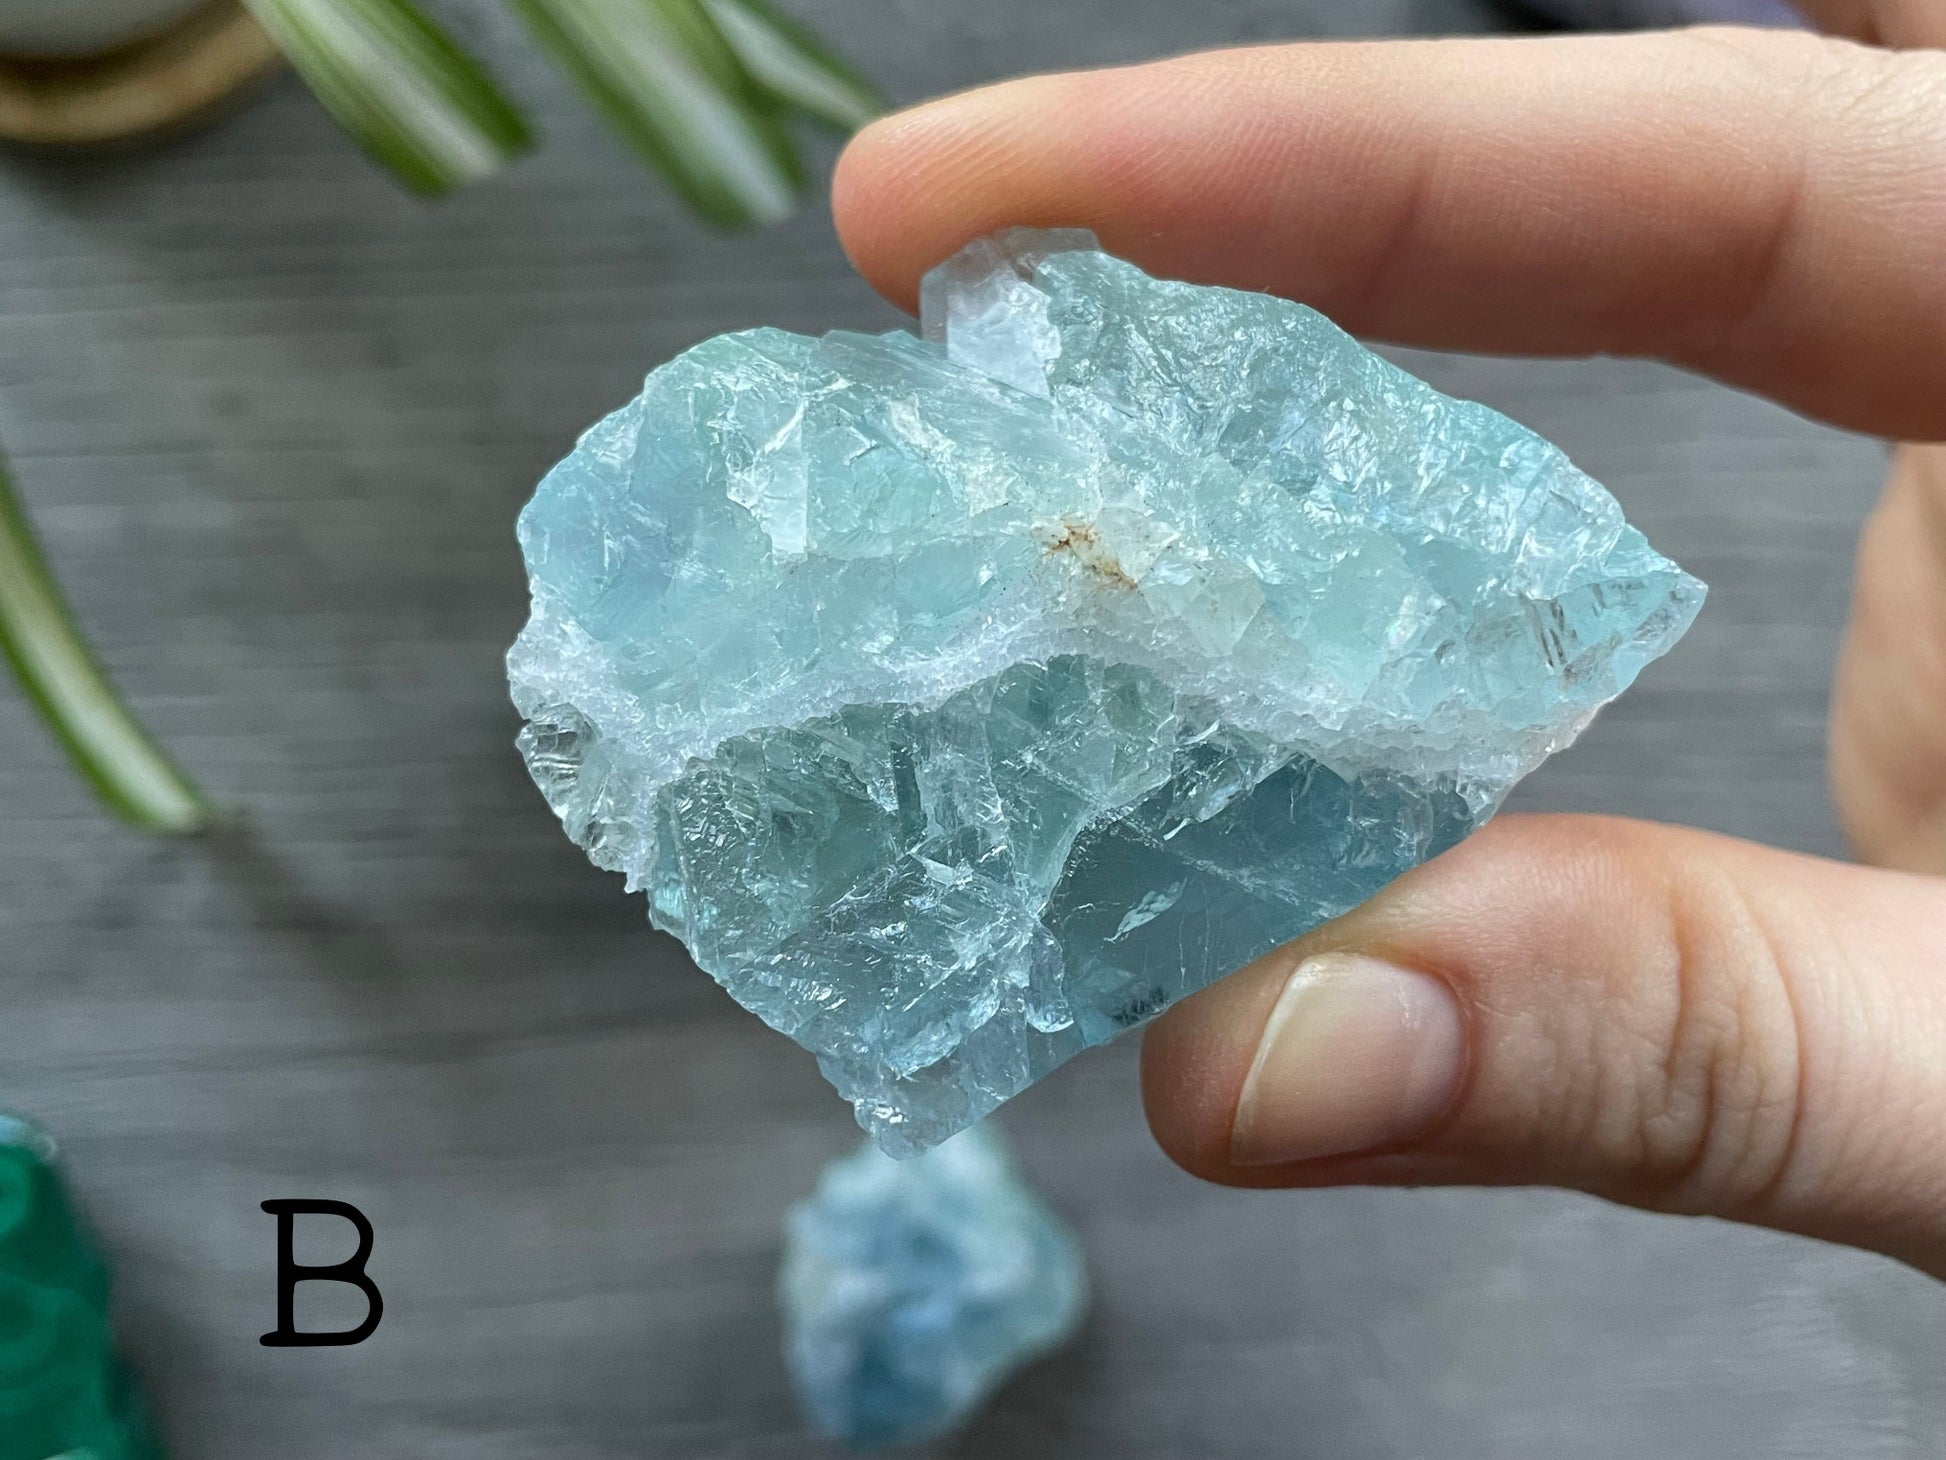 Pictured are various pieces of raw ice blue fluorite